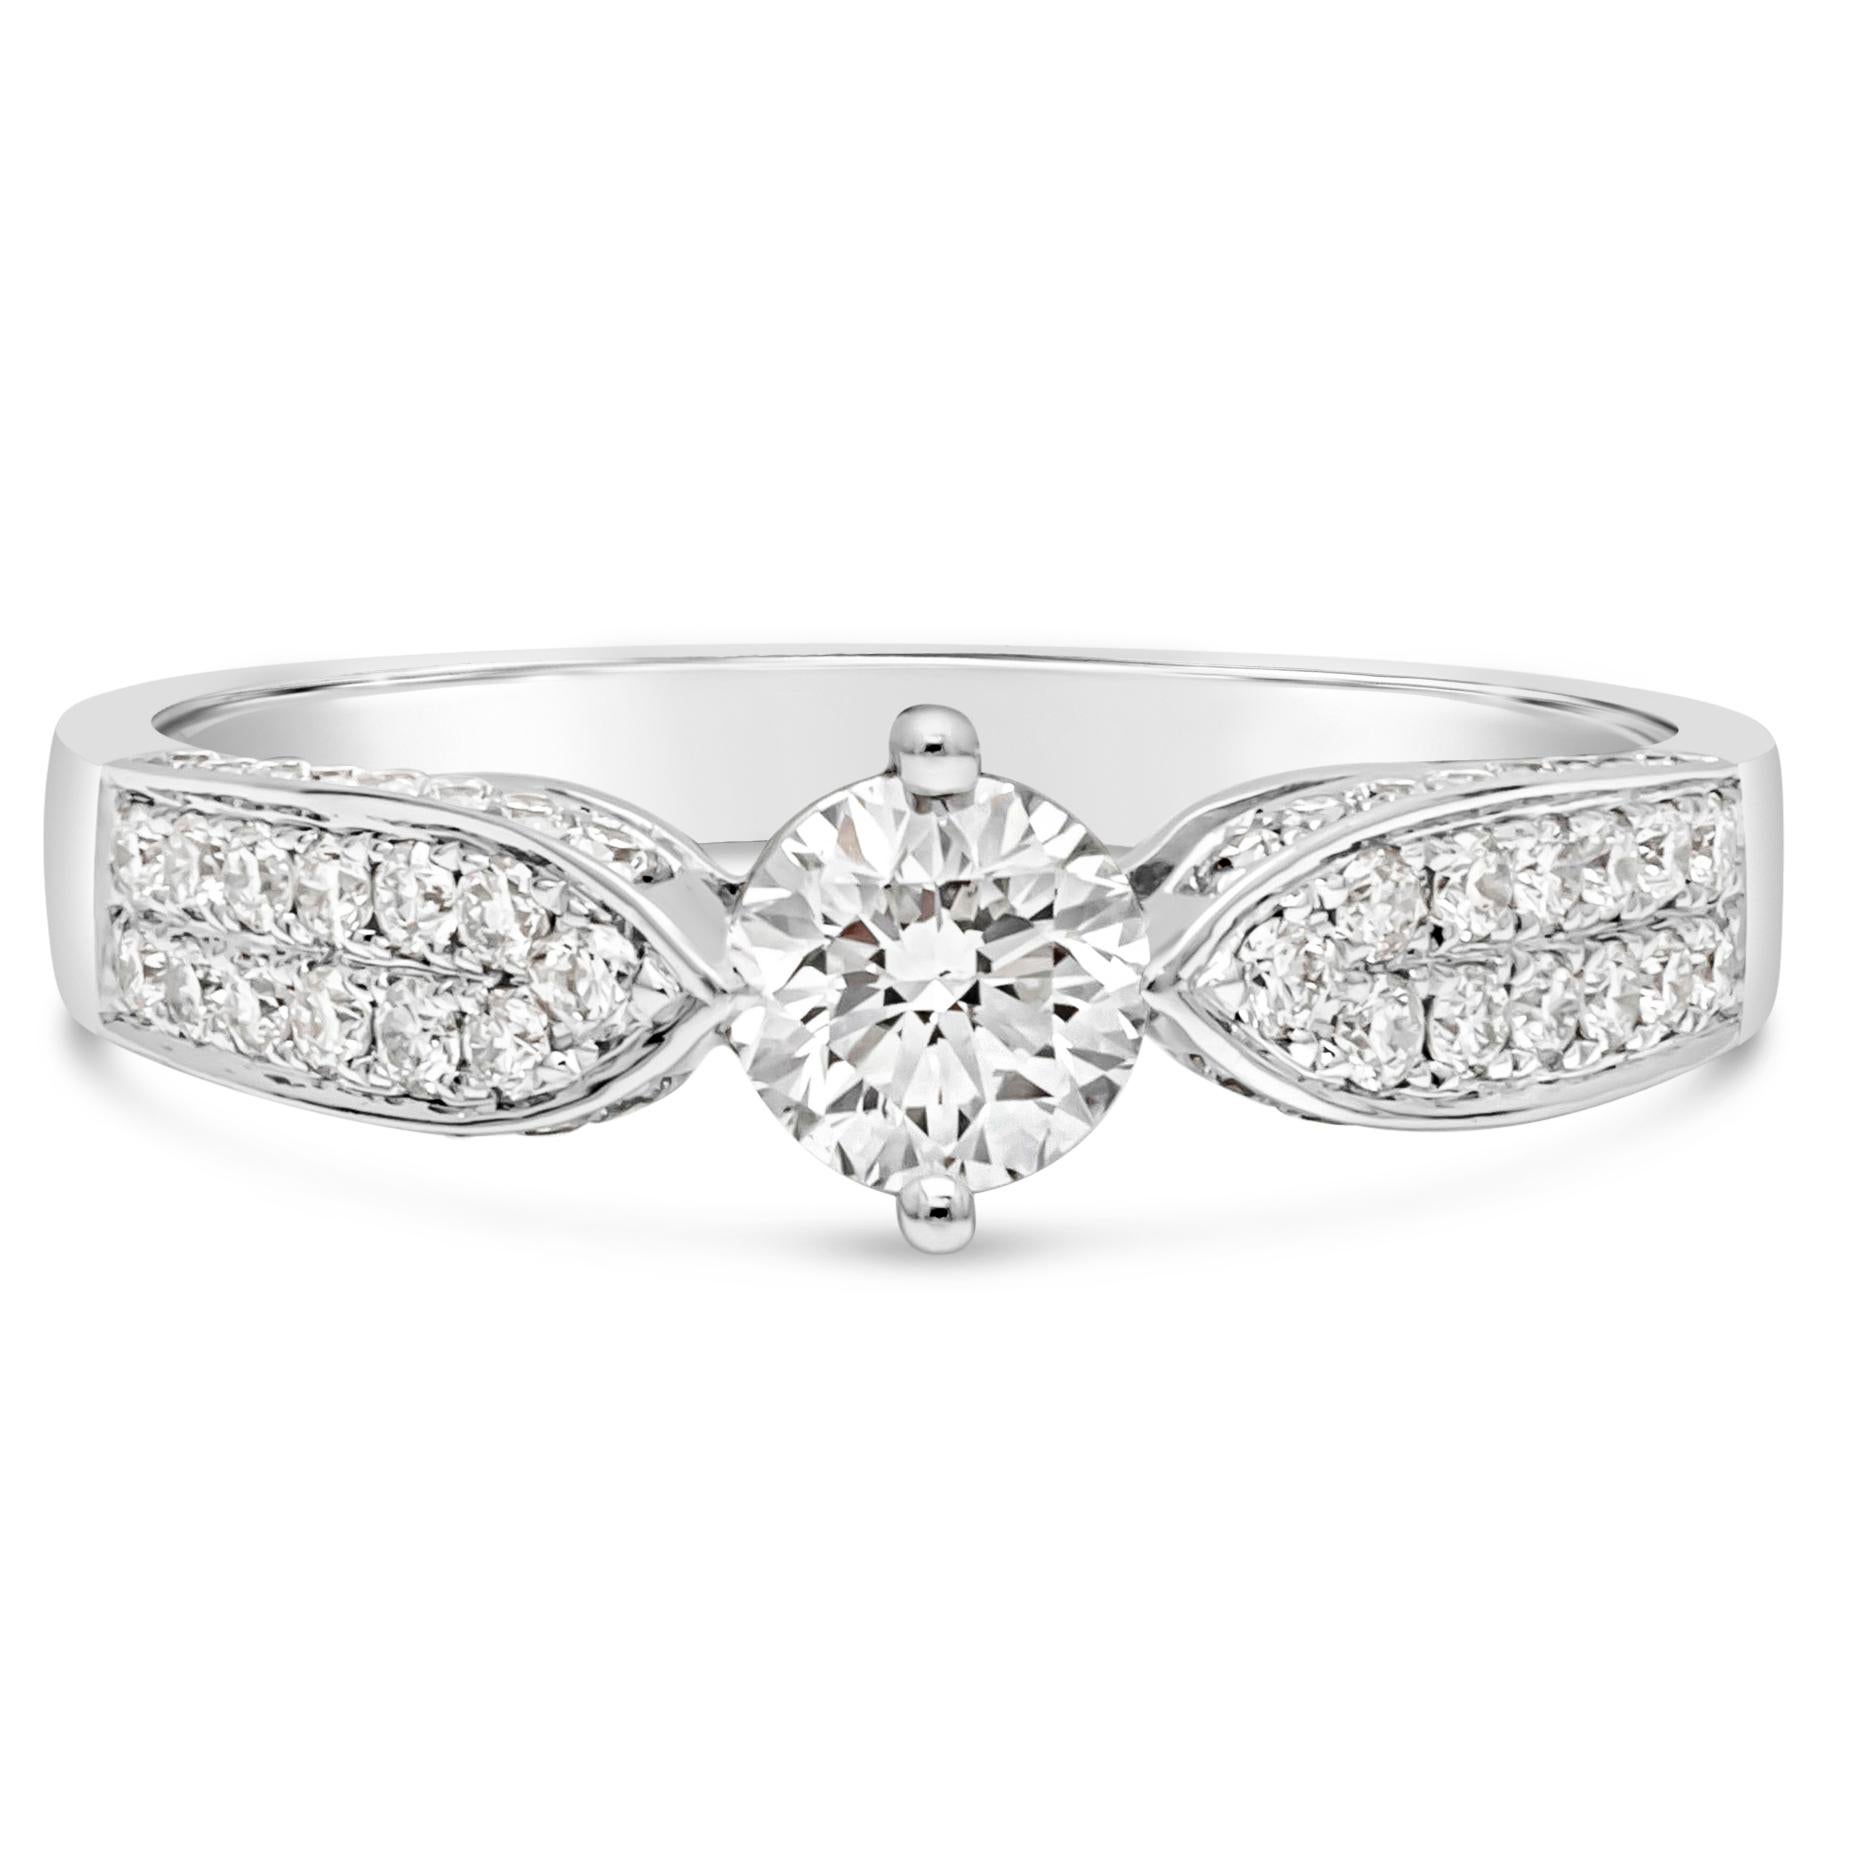 Features a 0.45 carat round brilliant diamond center stone set in a 18K white gold setting that tapers as it gets to the center diamond. The setting is micro-pave set with round brilliant melee diamonds on either side. Unique placement of the prongs